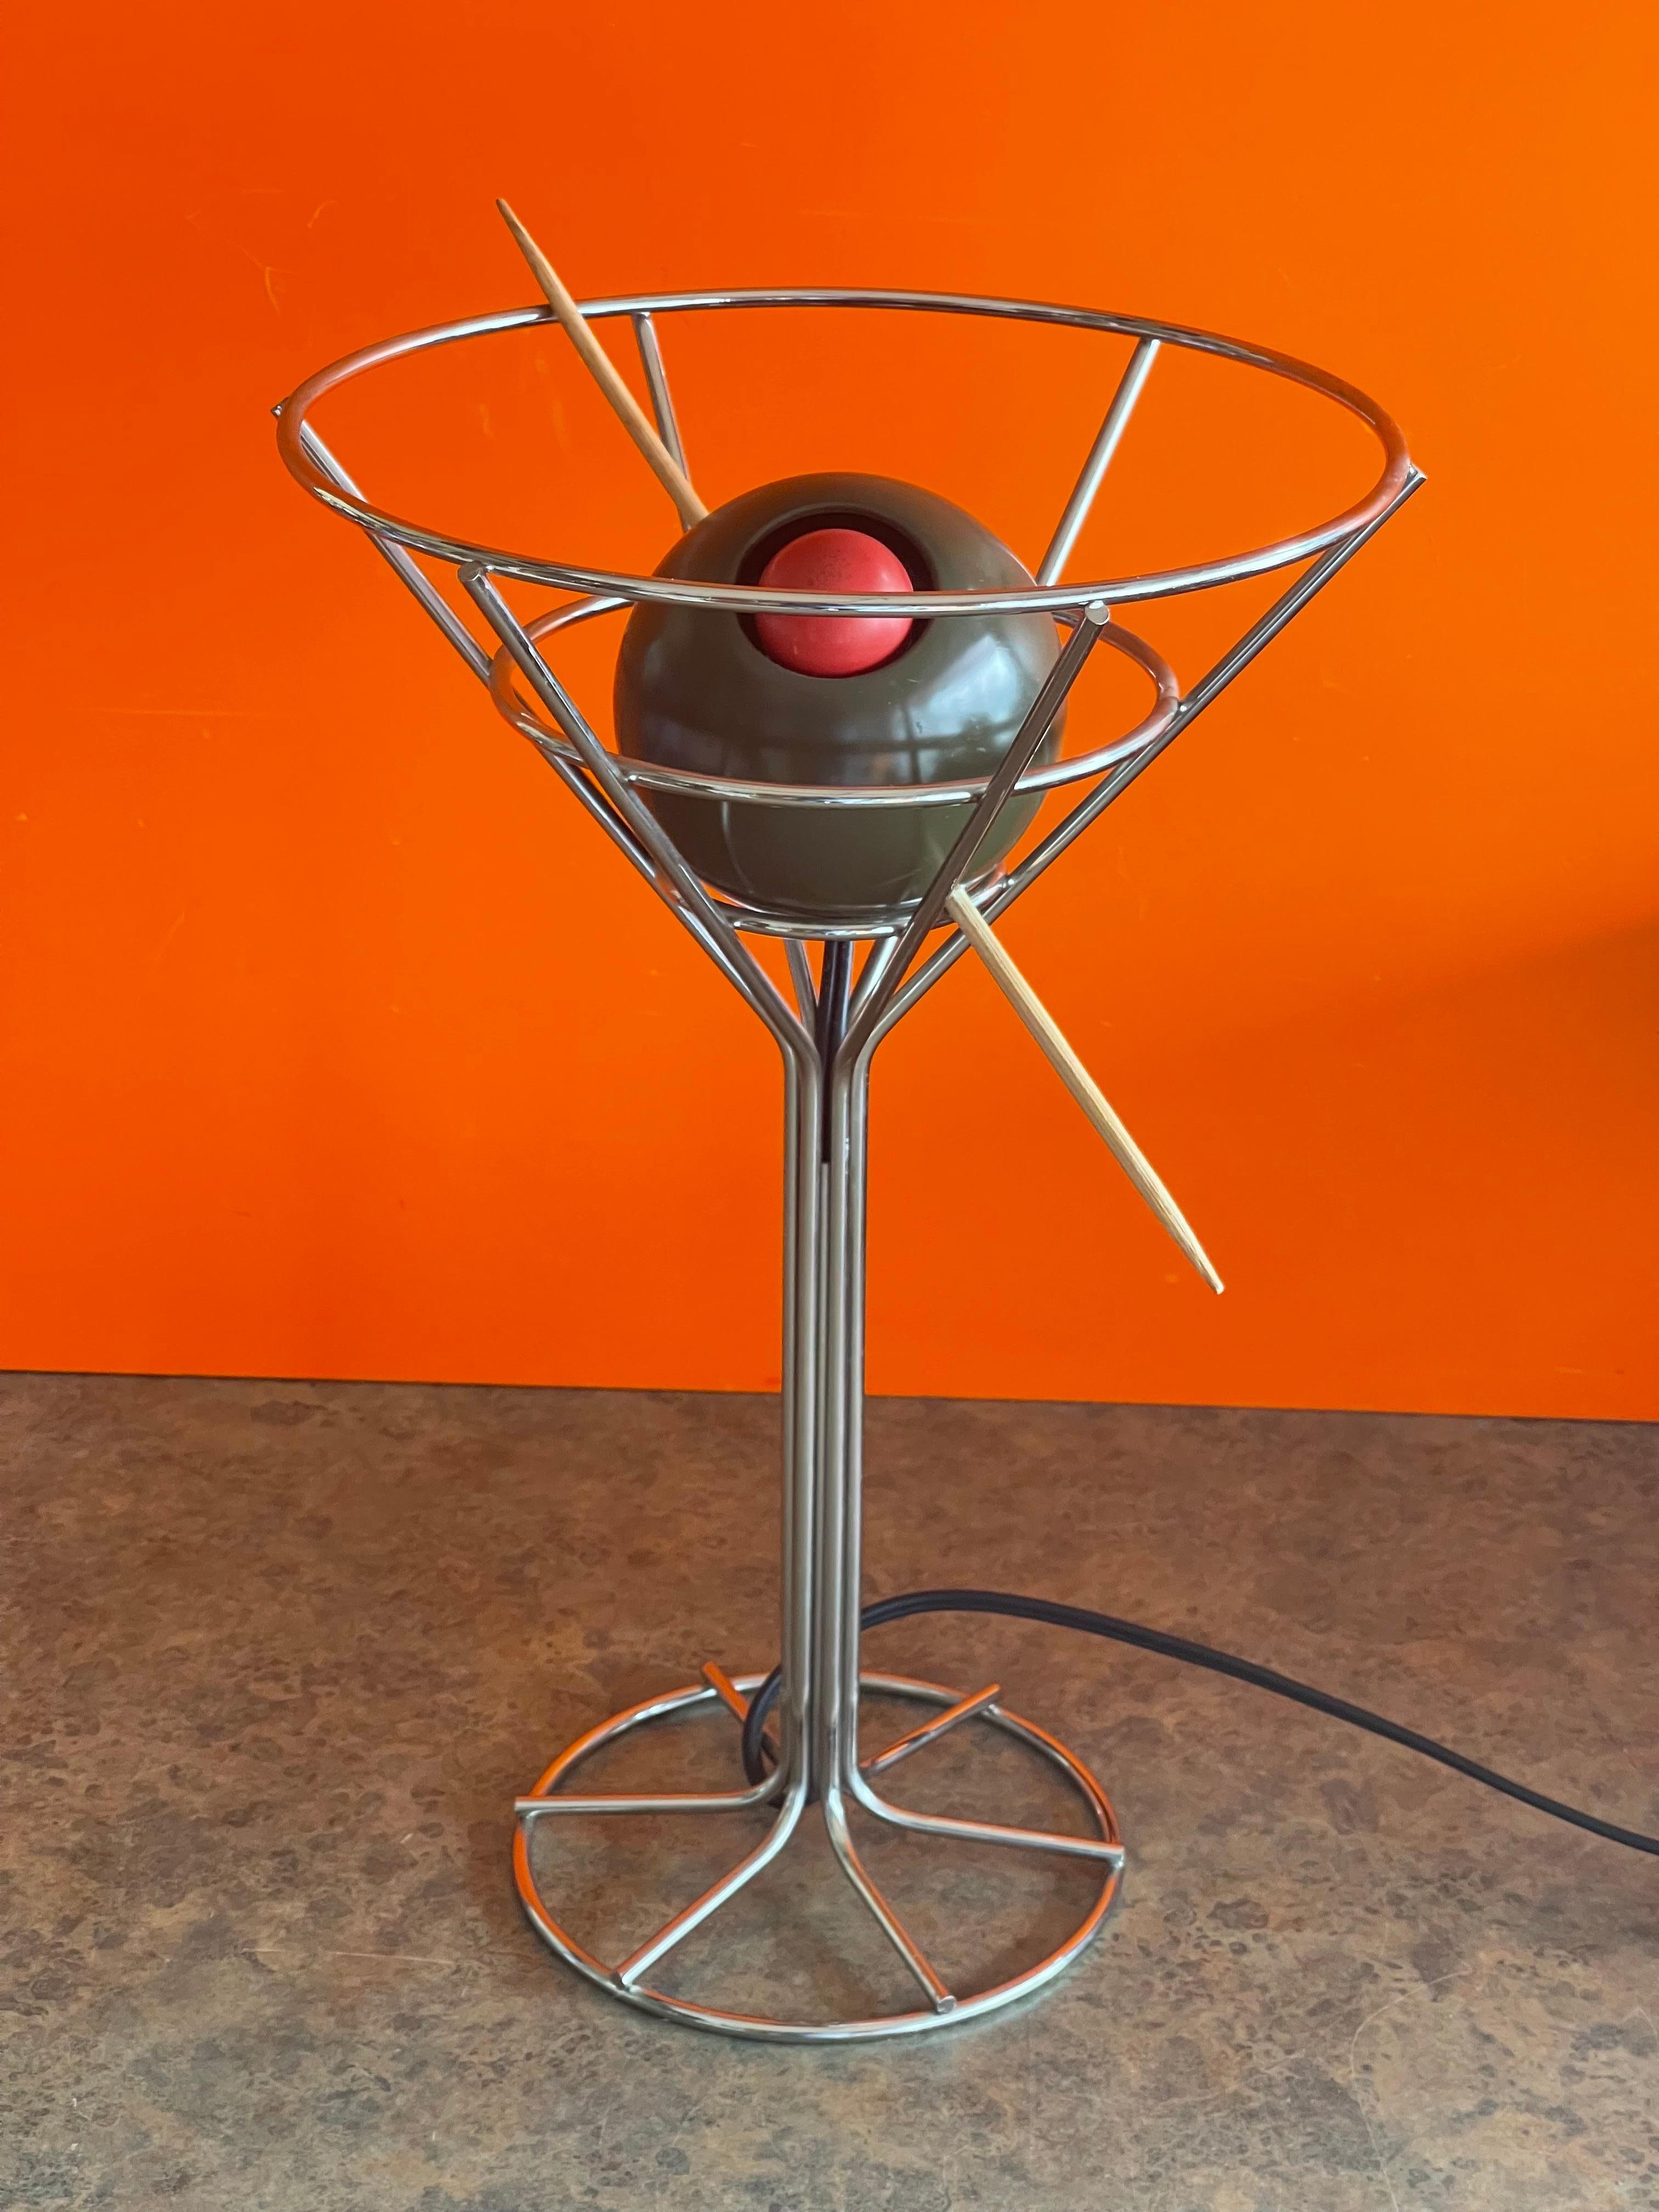 A unique and hard to find vintage martini with olive bar lamp by David Krys, circa 1993. The pop art lamp is made of chrome and molded plastic and has a pimento red bulb with toothpick; this piece is extremely cool! The lamp is in good working